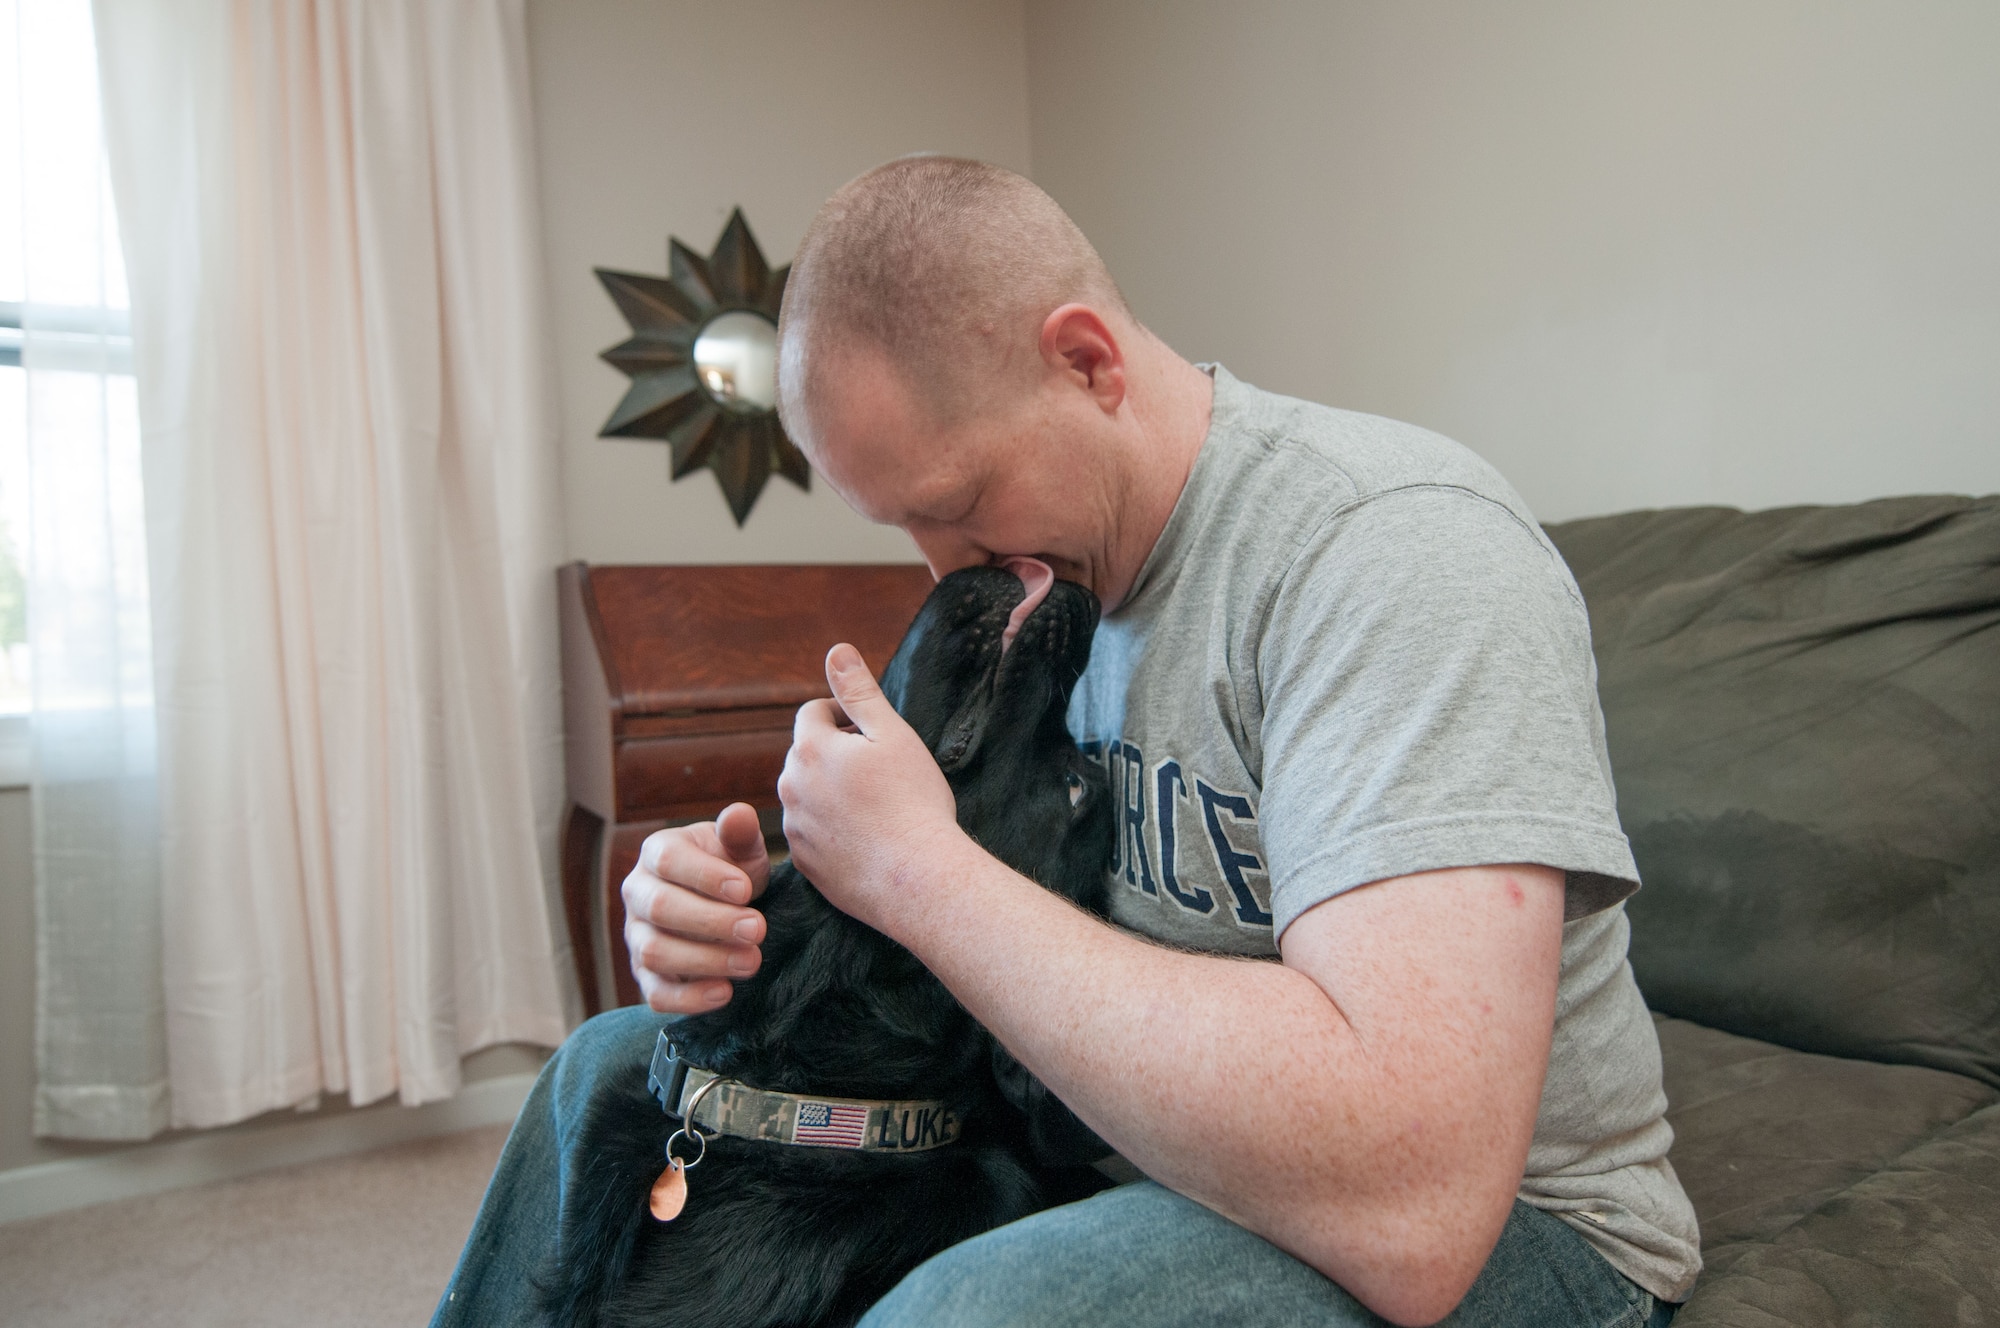 Staff Sgt. Ryan Garrison embraces his service dog Luke at their home in Glen Burnie, Md., March 29, 2016. Garrison, who works at the Defense Courier Station-Baltimore on Fort Meade, Md., recently received the Labrador who helps him cope with the physical and emotional effects of his combat-related injury. (U.S. Air Force photo/Sean Kimmons)